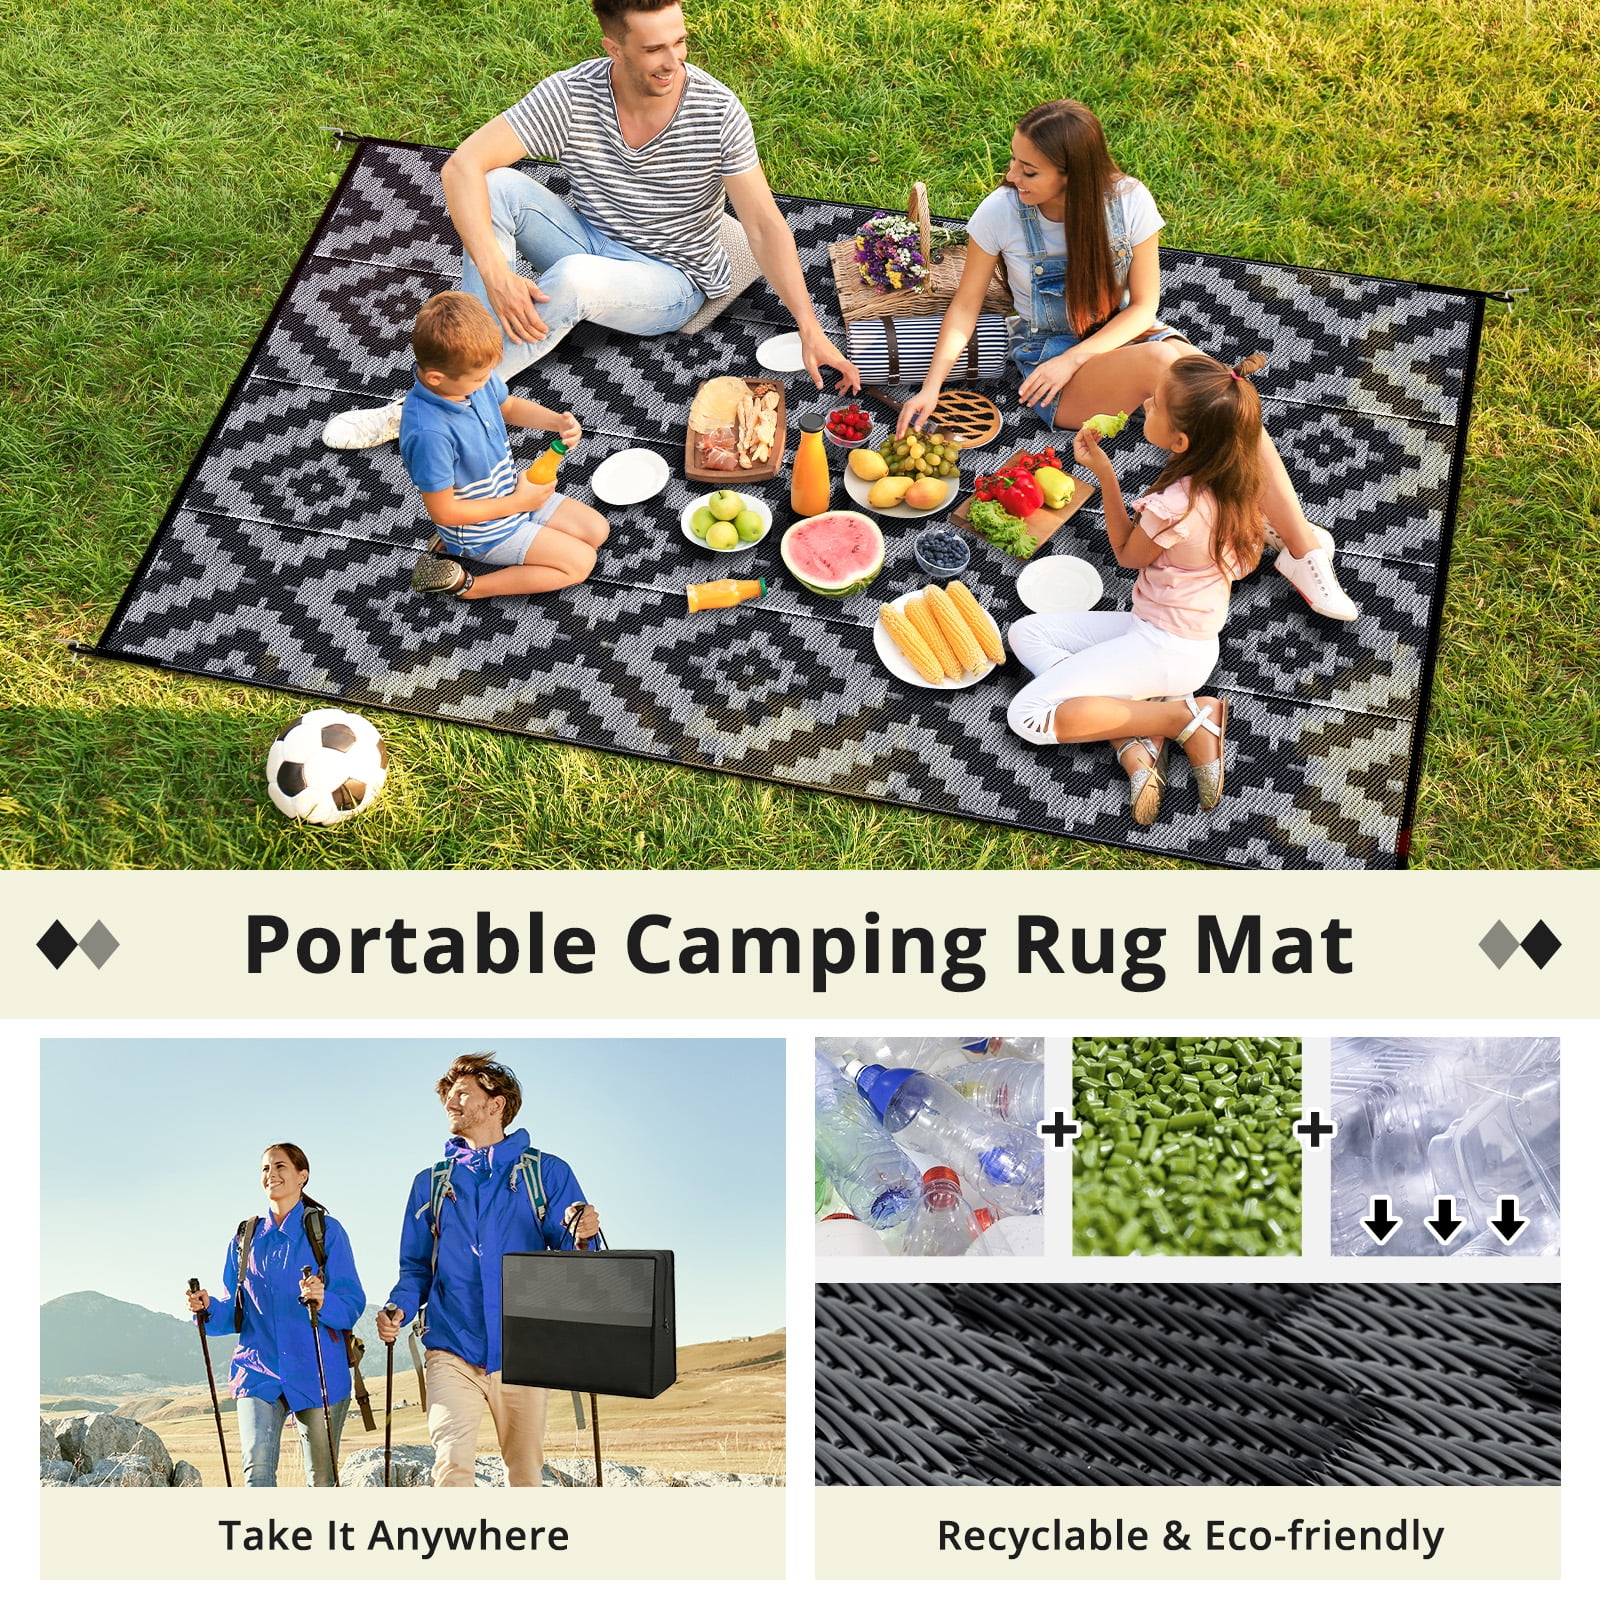 GOTGELIF 5'x8' Outdoor Rugs Outside Patio Mat Reversible RV  Camping Rug Picnic